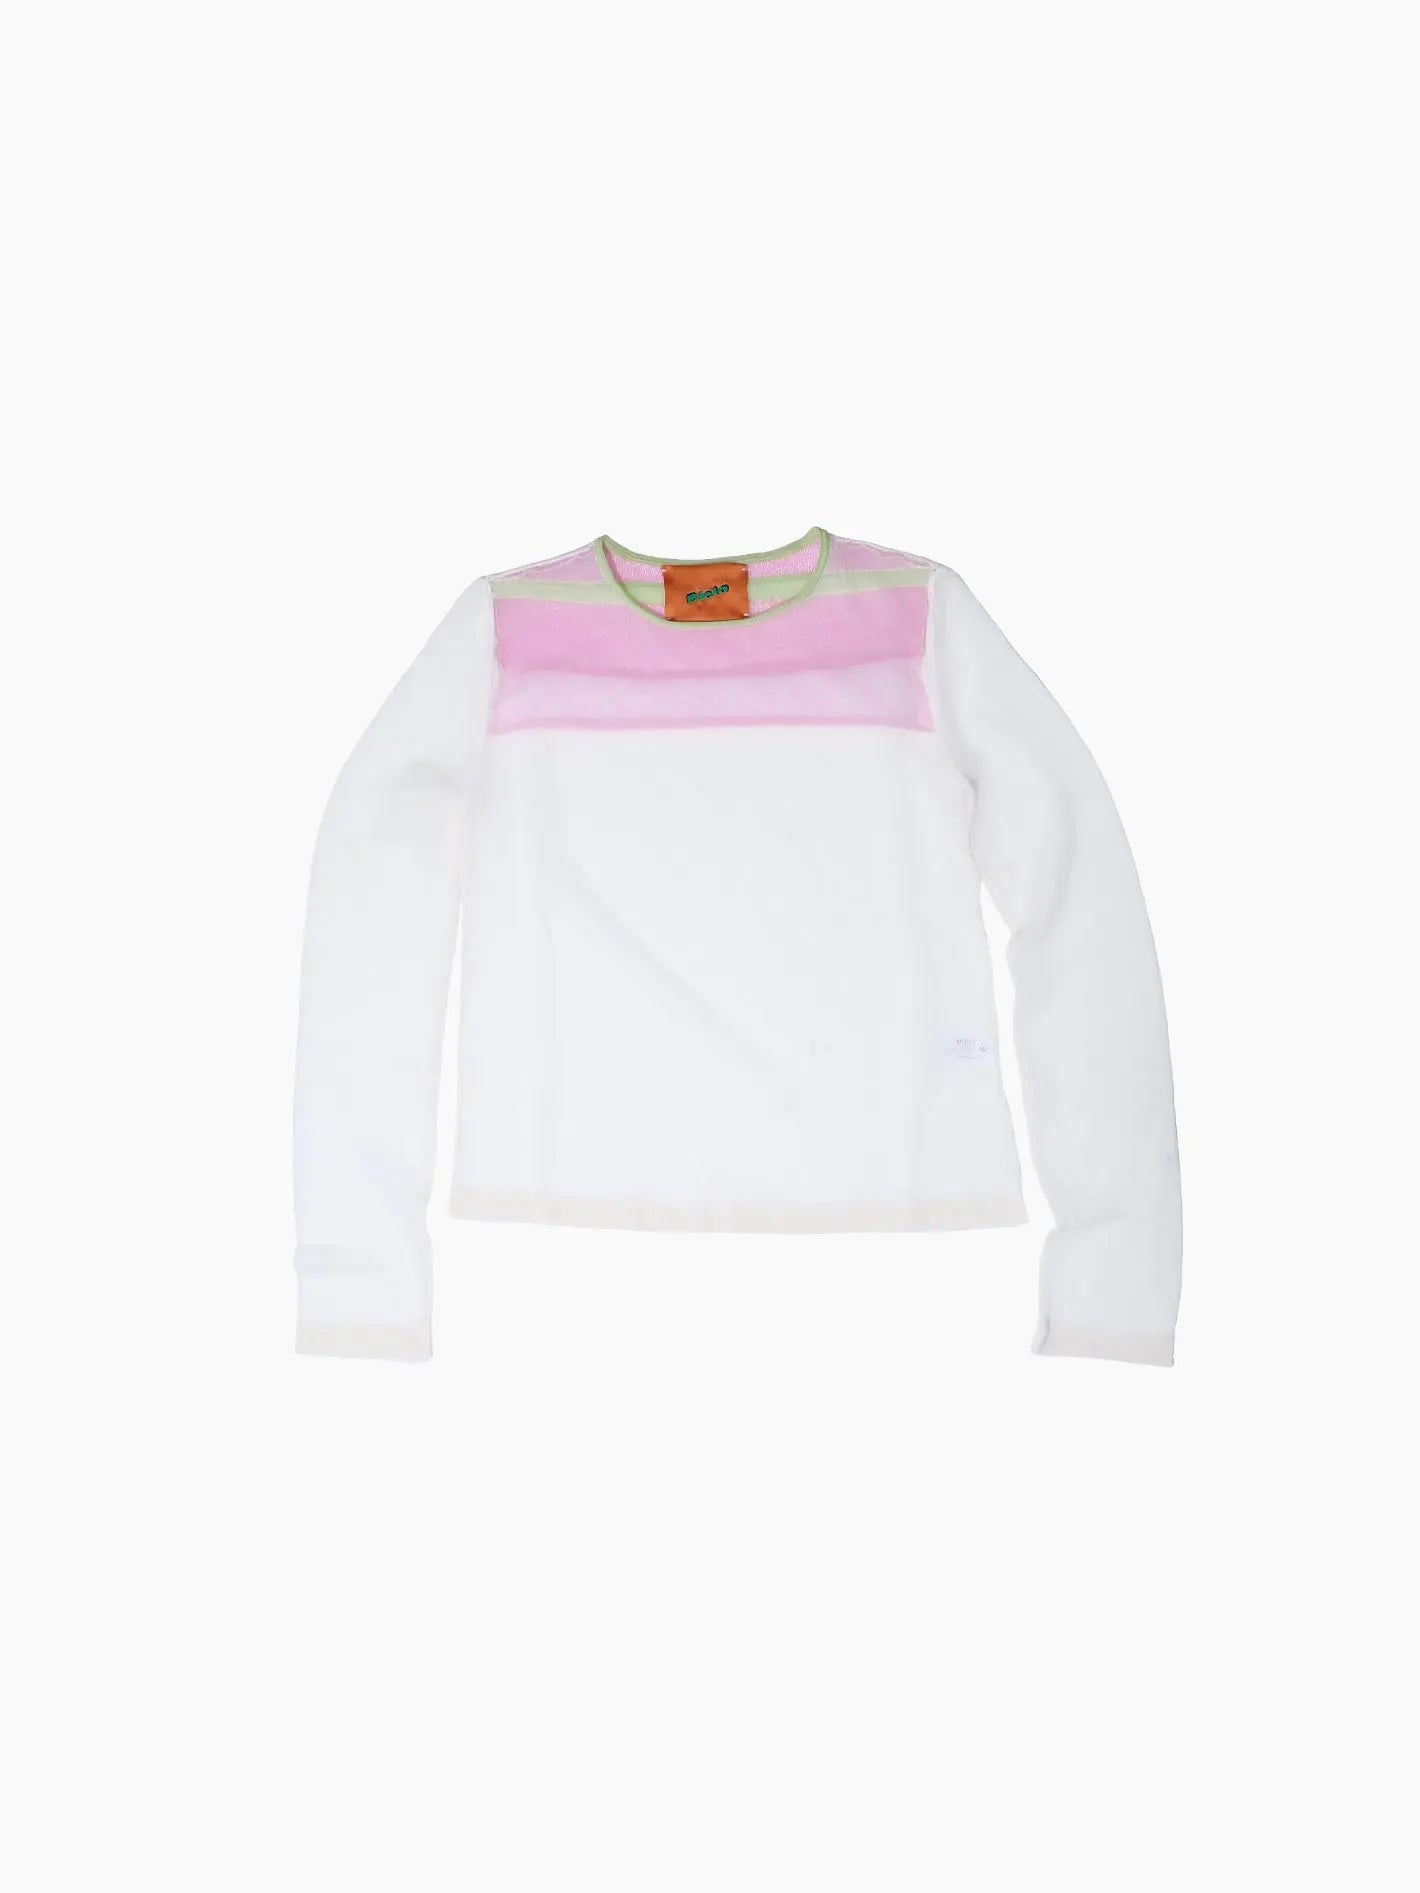 A long-sleeve, white, semi-sheer top with pink and light green accents around the neckline and chest area. The neckline features a small orange label with black text. This minimalist design exudes casual style—perfect for a day out in Barcelona or browsing your favorite store. The Bari Sweater Ecru by Bielo is an ideal choice for such versatile occasions.